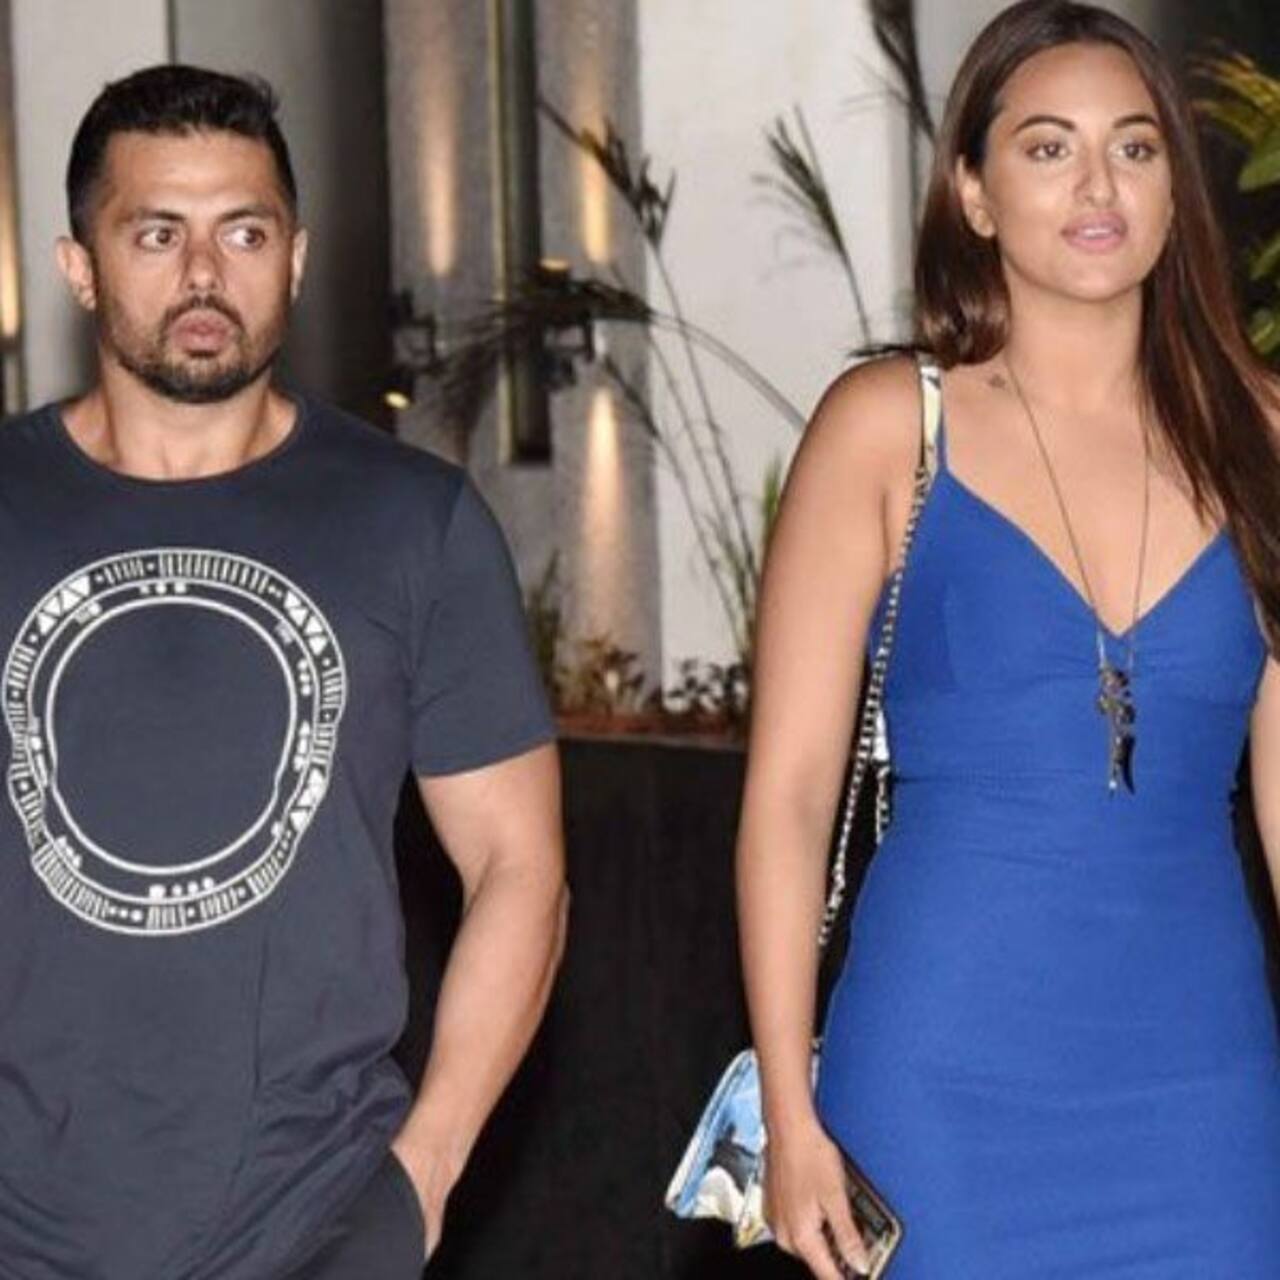 Sonakshi Sinha Sparks Engagement Rumours Heres A Look At The Actress Rumoured Love Affairs